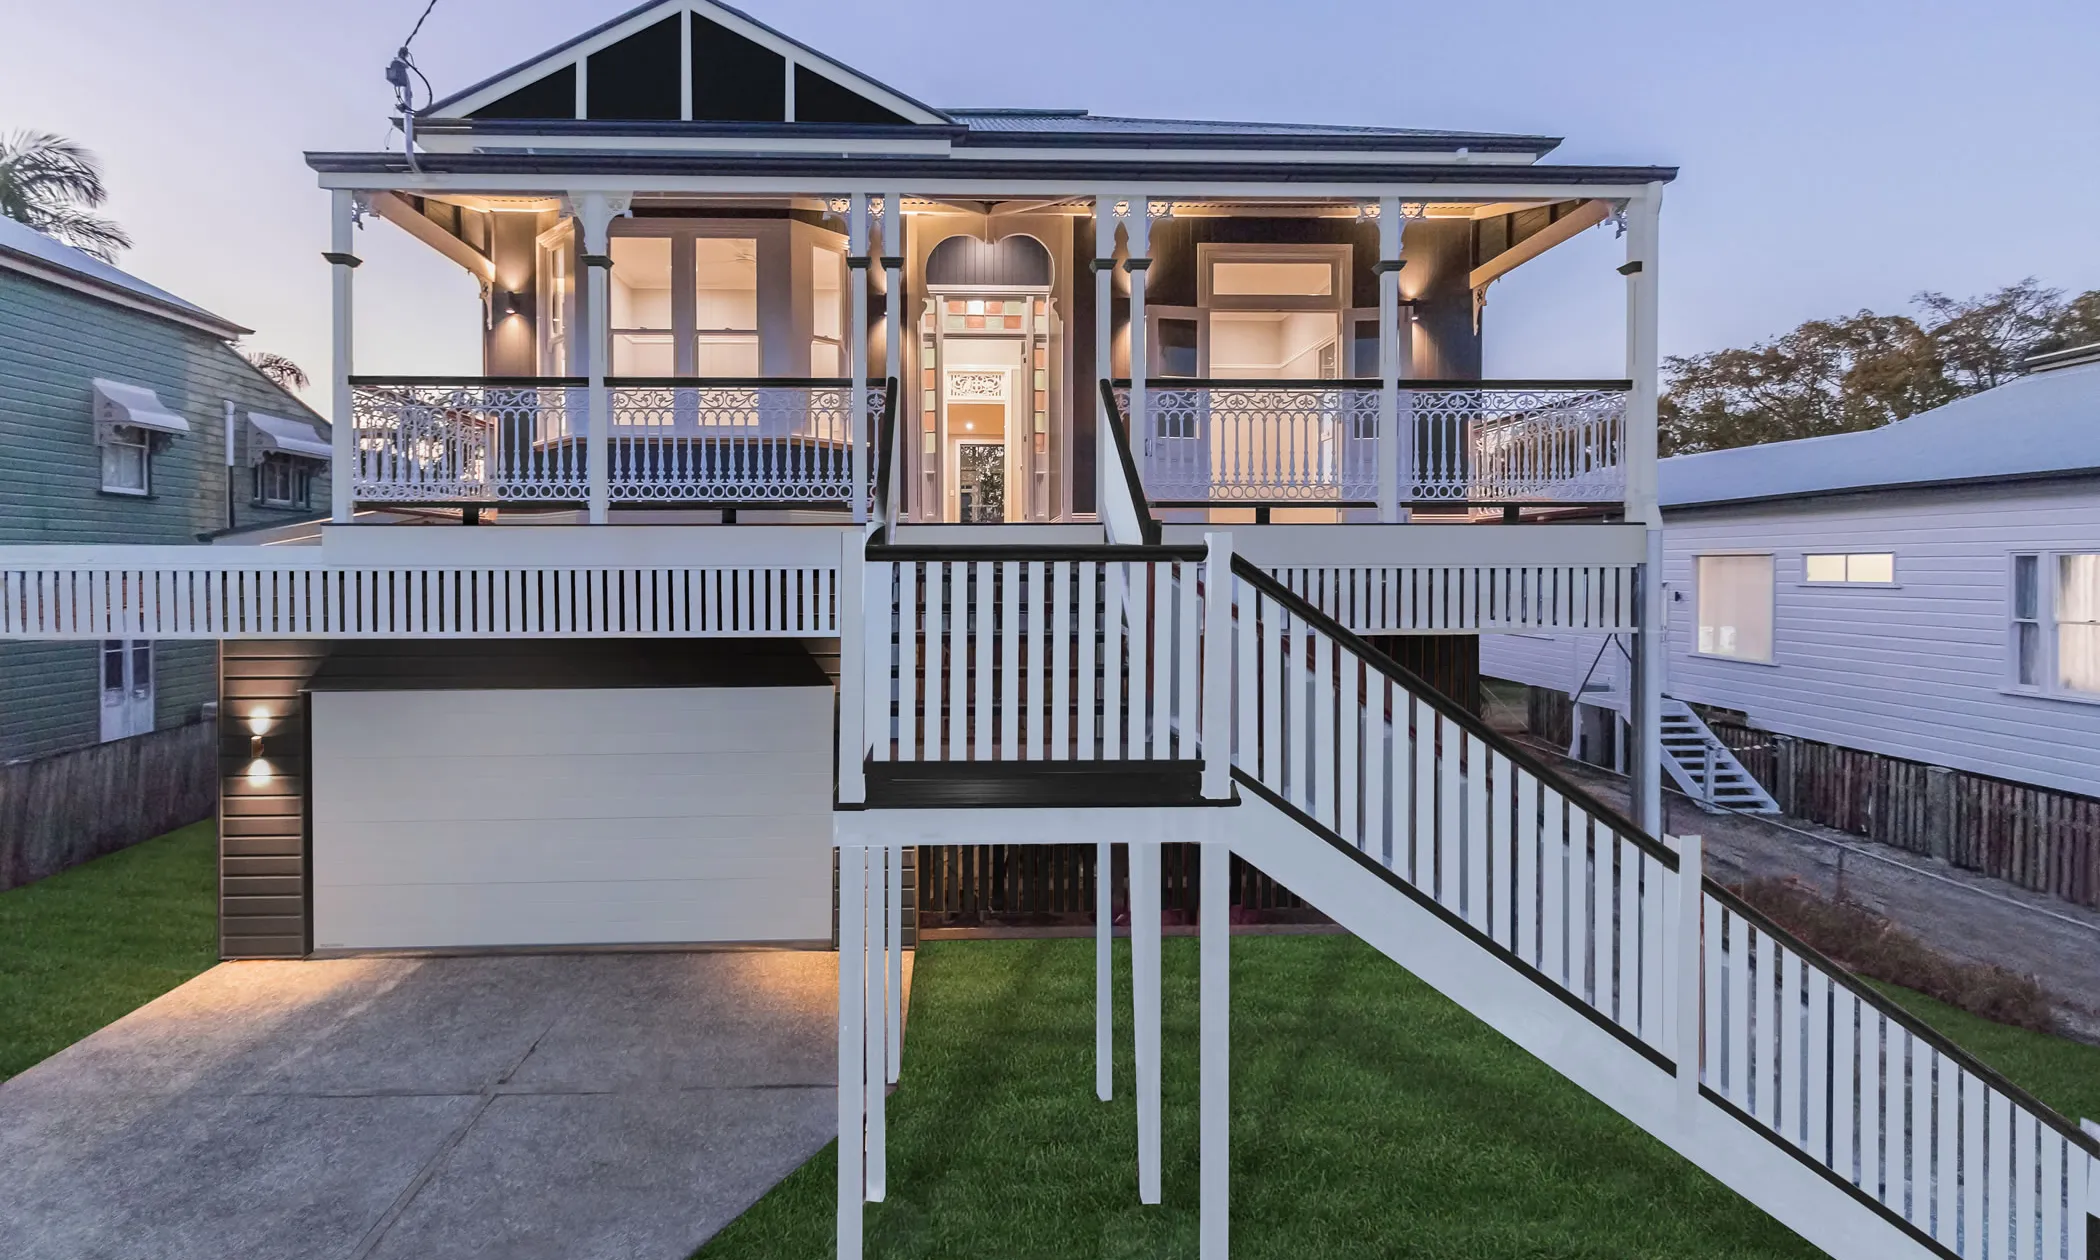 Traditional Queenslander Renovation Front of house, lace work and deck